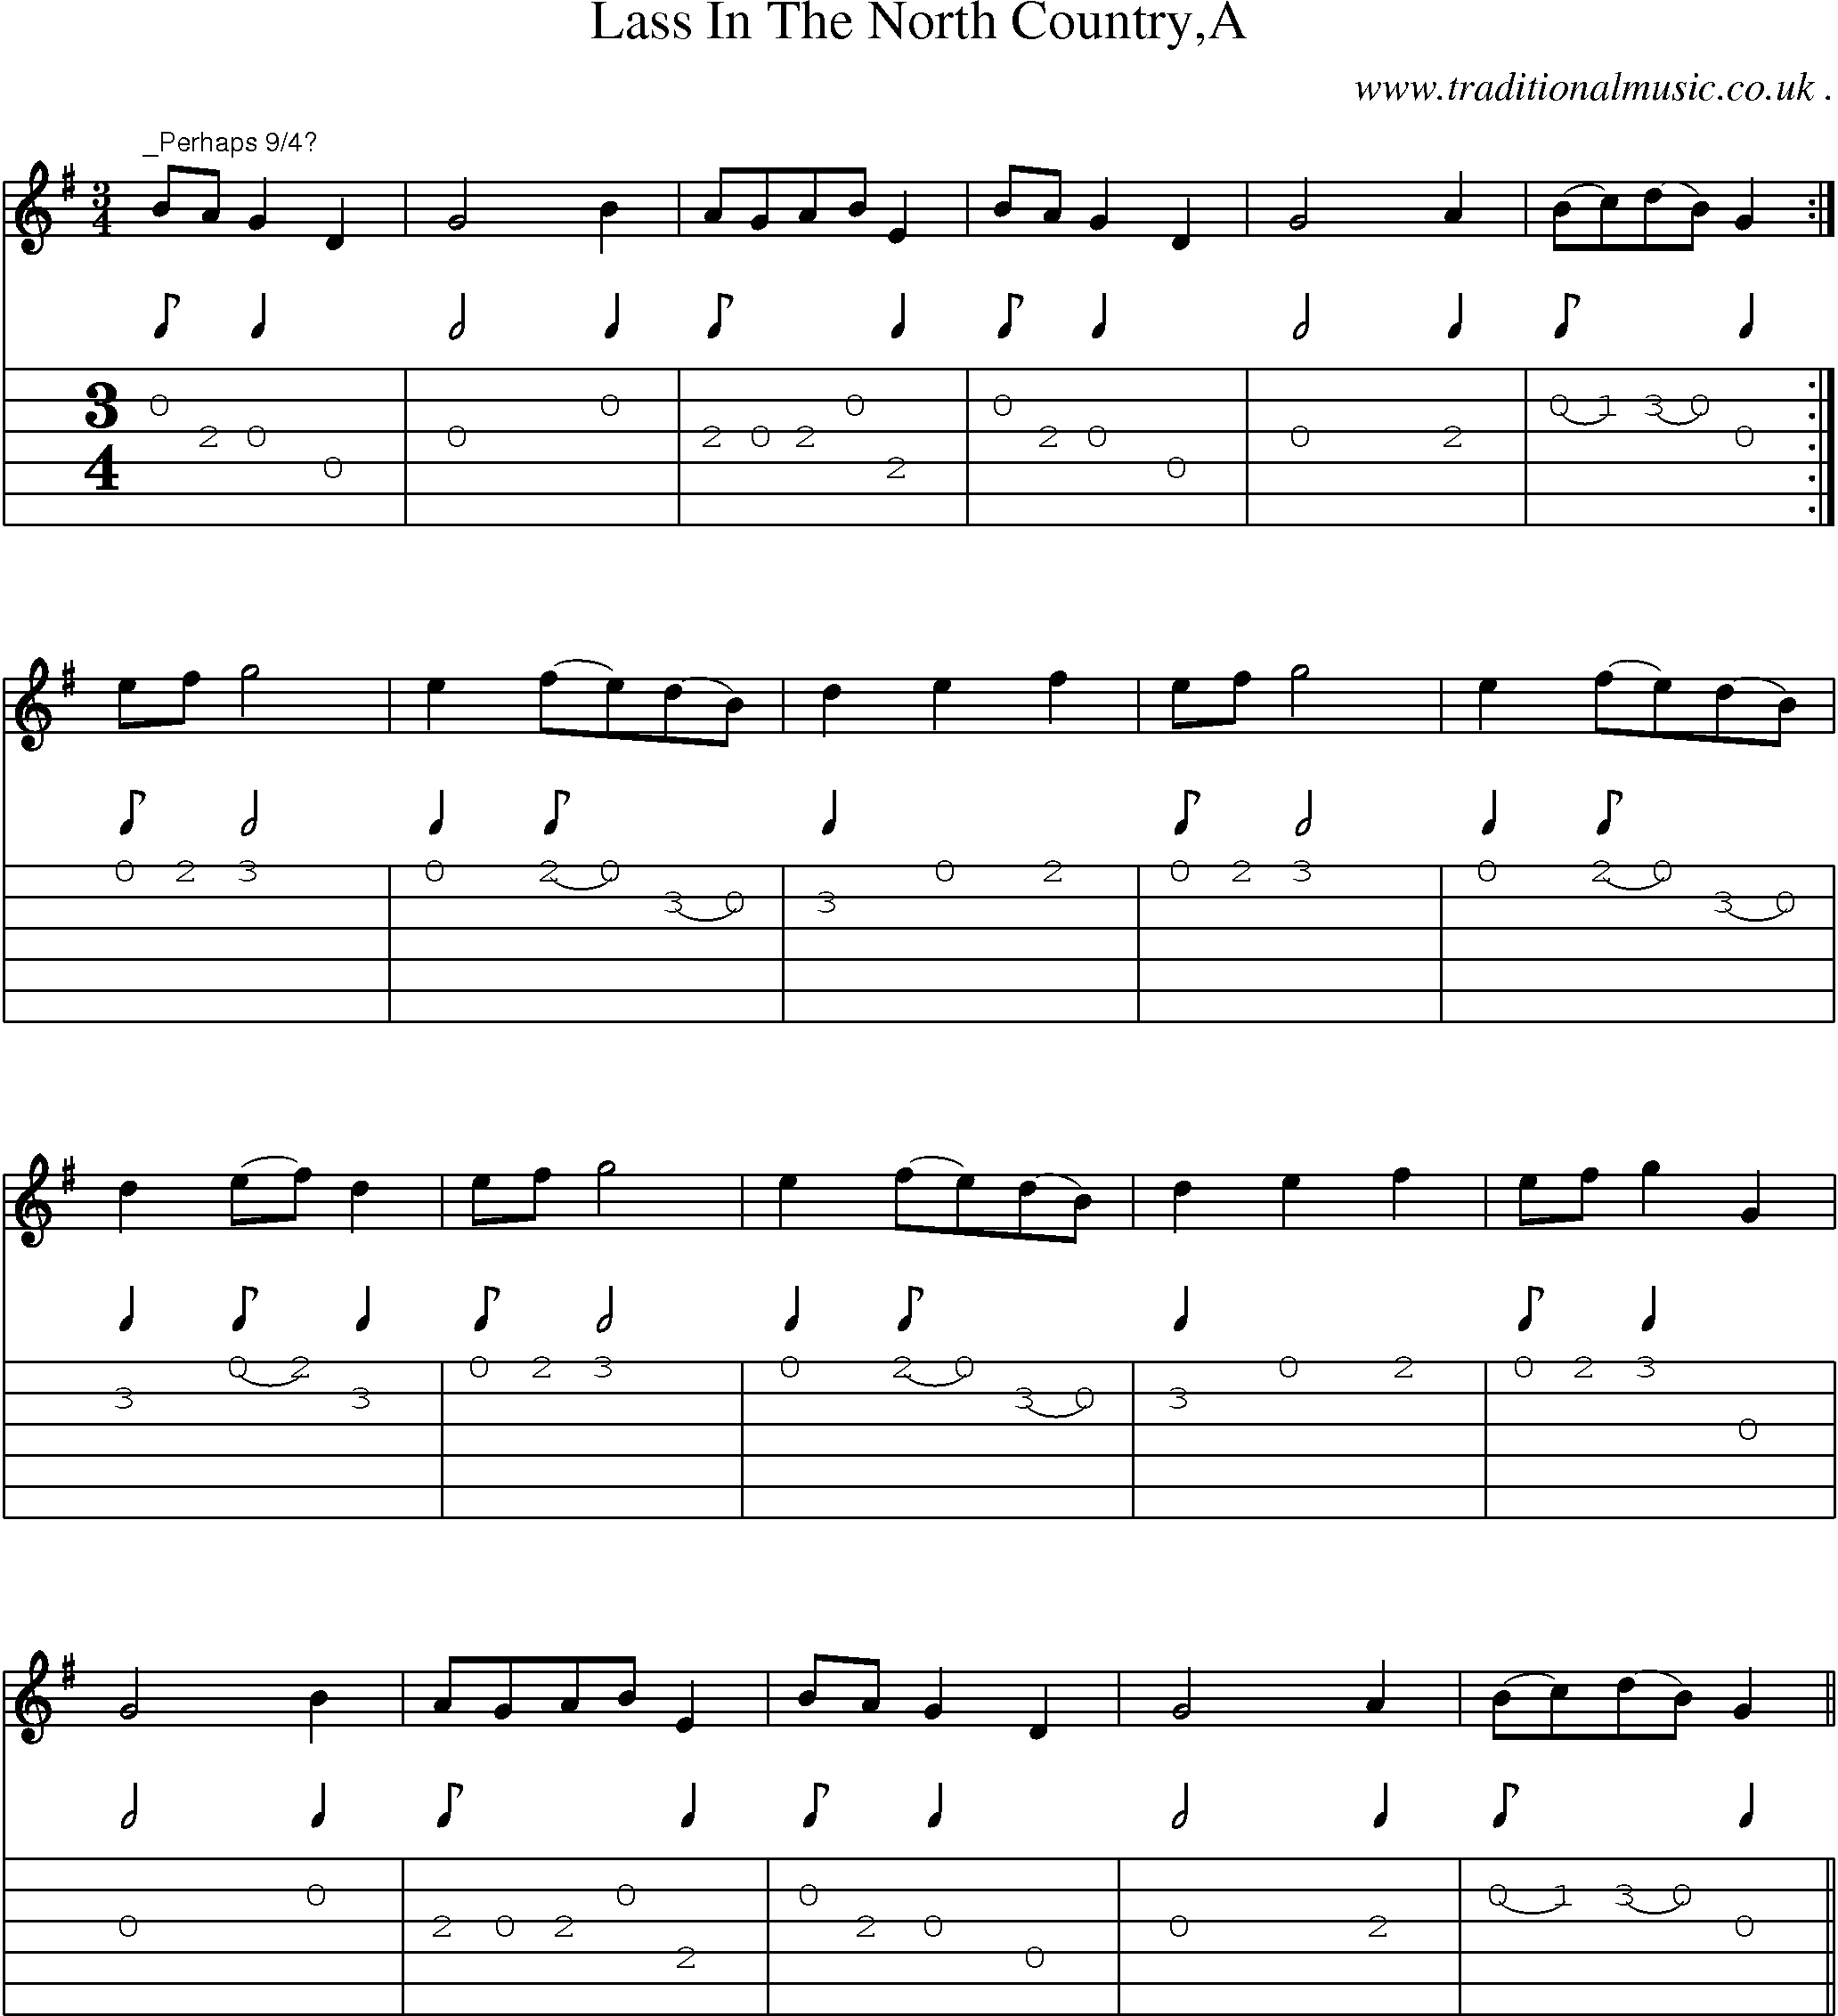 Sheet-Music and Guitar Tabs for Lass In The North Countrya